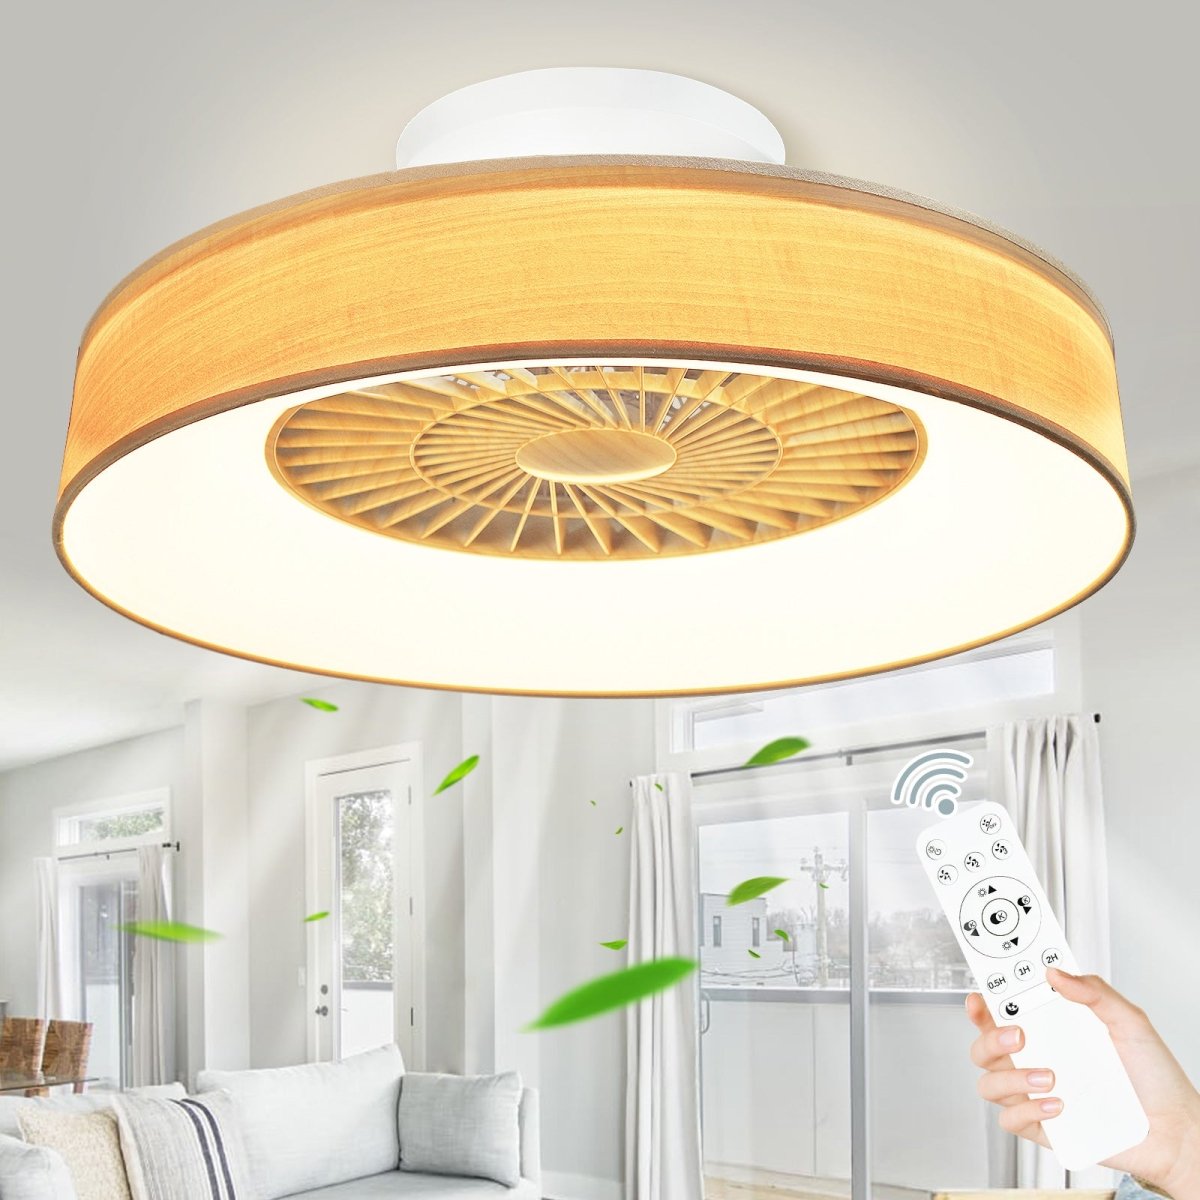 DLLT Low Profile Ceiling Fan - 22.5 Inch Bladeless Ceiling Fan with Light and Remote, 3 Colors Dimmable LED 3 Speeds 5 Blades Enclosed Ceiling Fans with Light for Living Room Bedroom, Wood Grain - WS-FPZ47-40C-WG 1 | DEPULEY